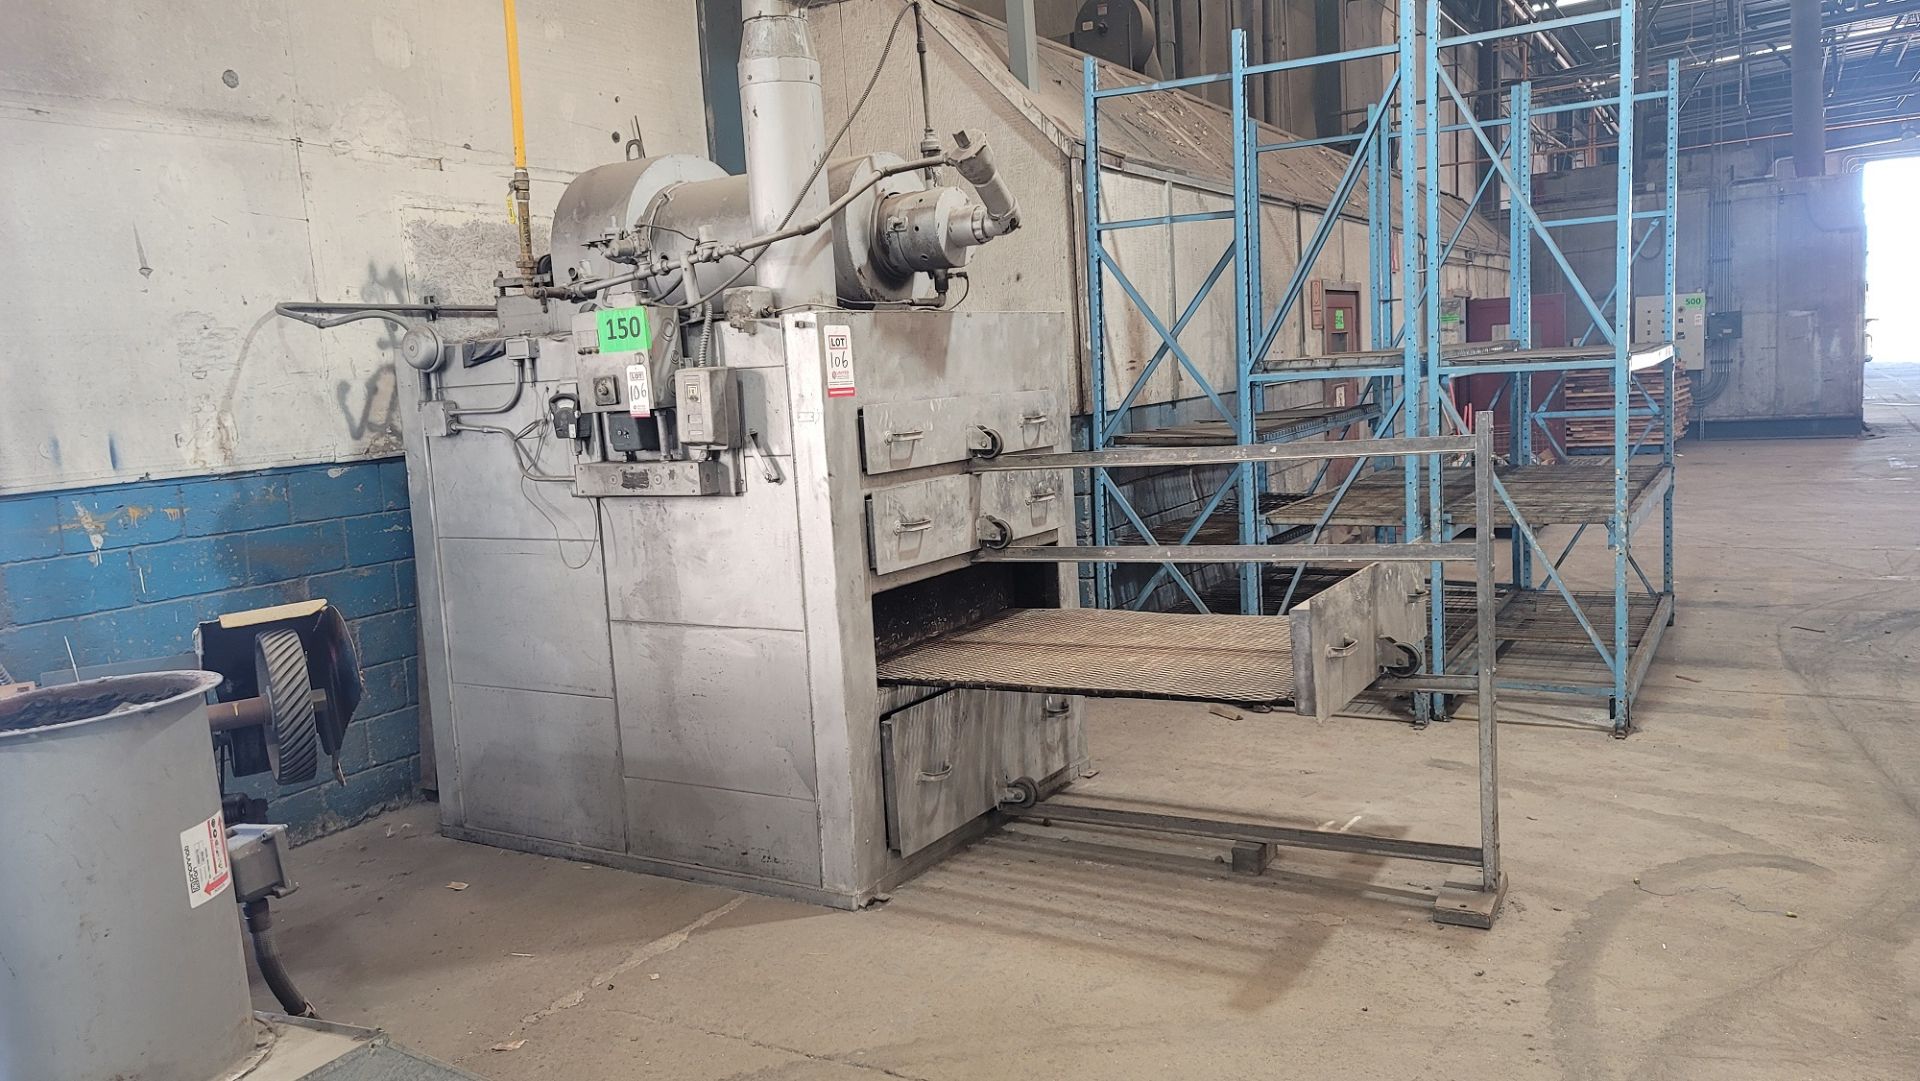 GAS BURNER FURNACE W/ DRAWERS FOR CORES (PLM 150)